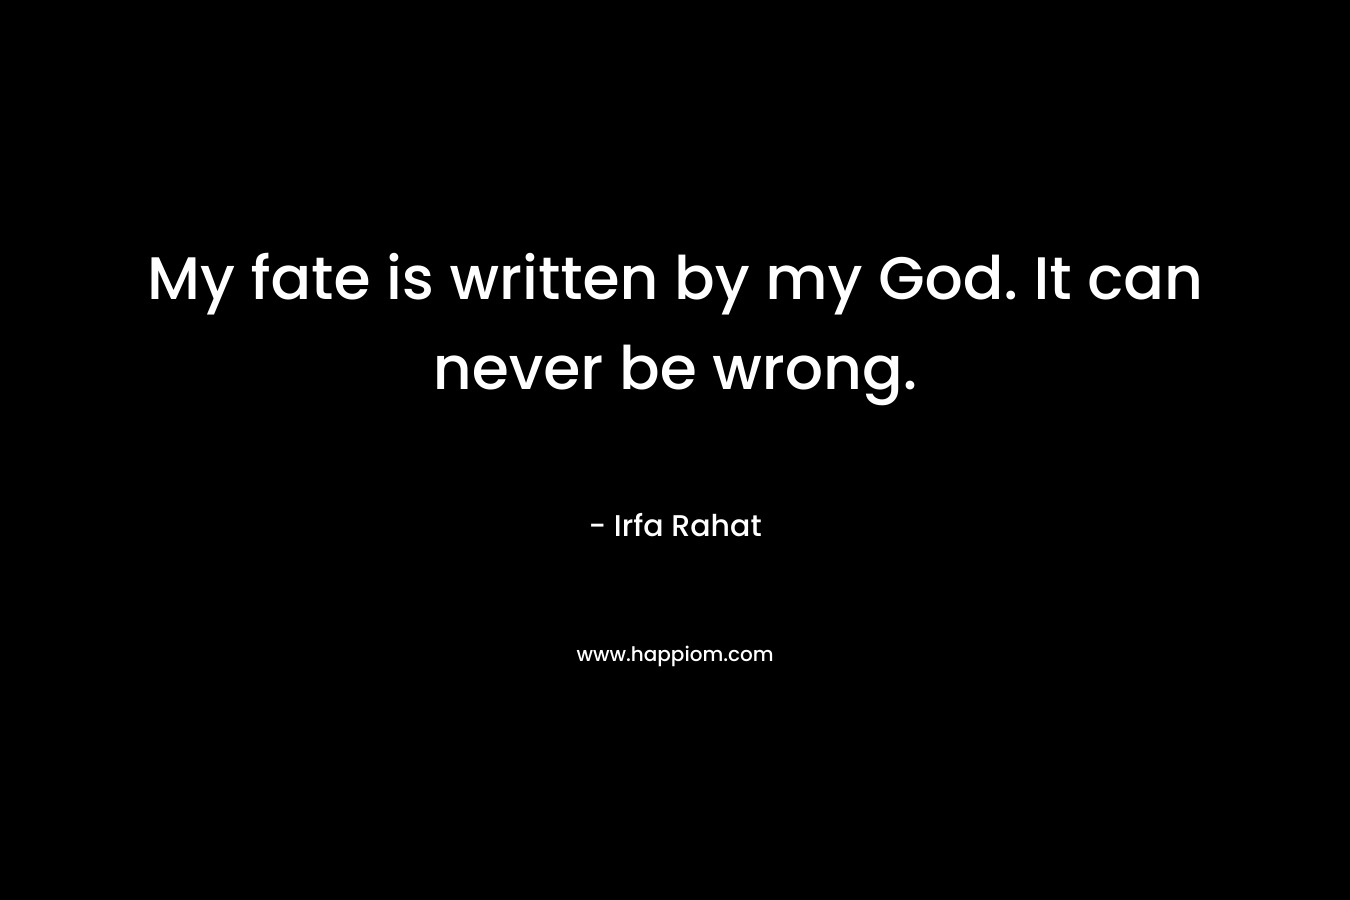 My fate is written by my God. It can never be wrong. – Irfa Rahat